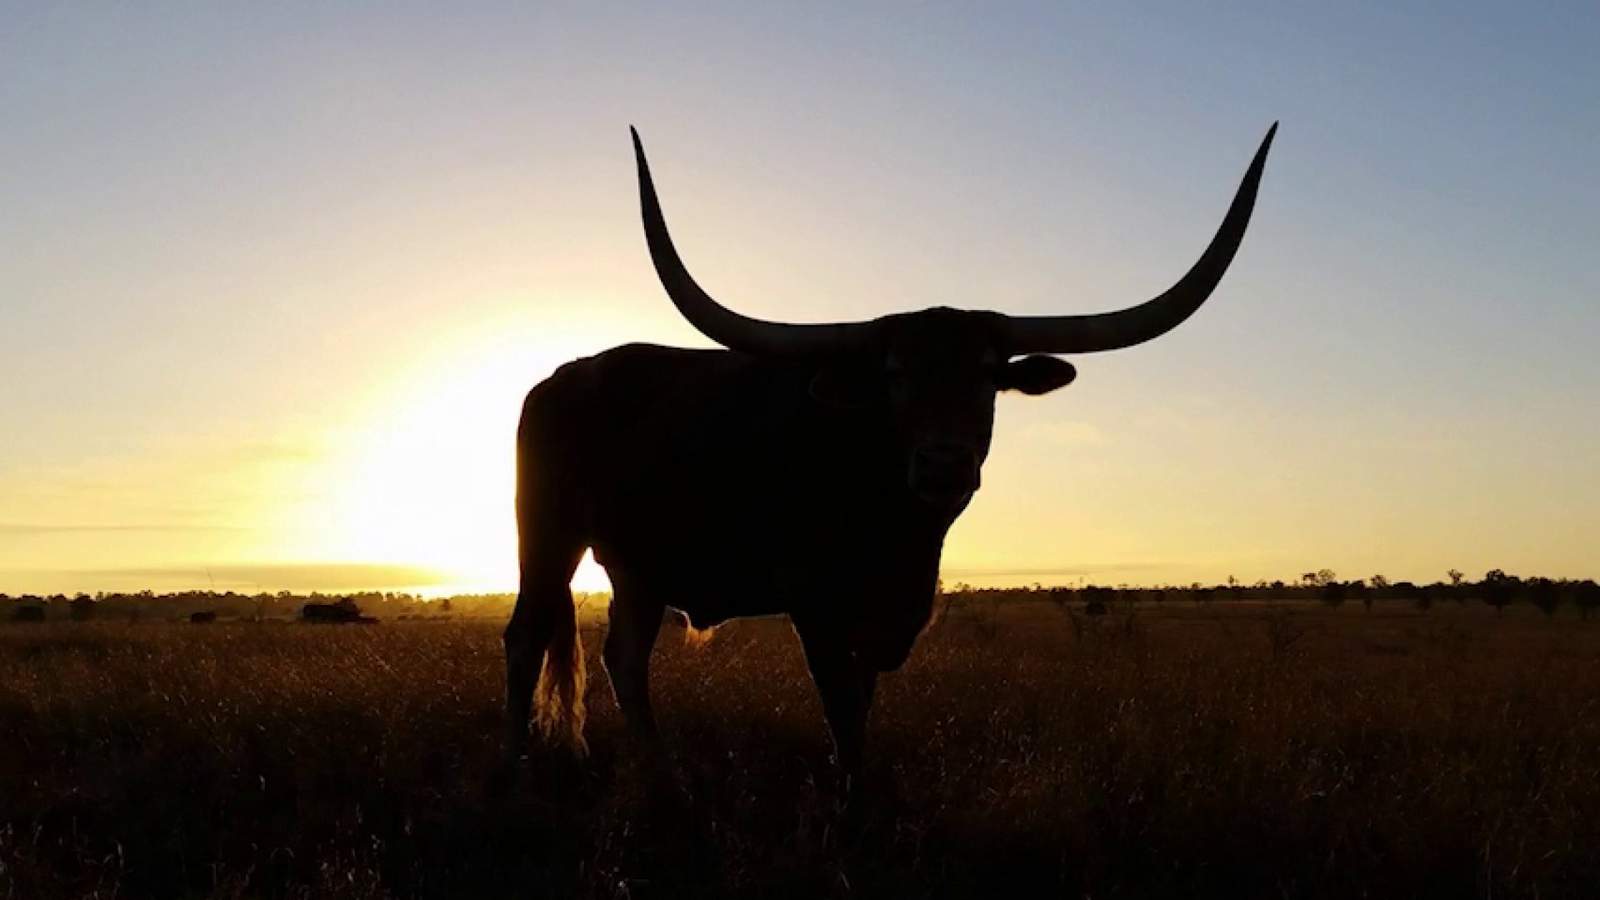 Tejanos were key to developing the ranching industry, bringing longhorns into the state